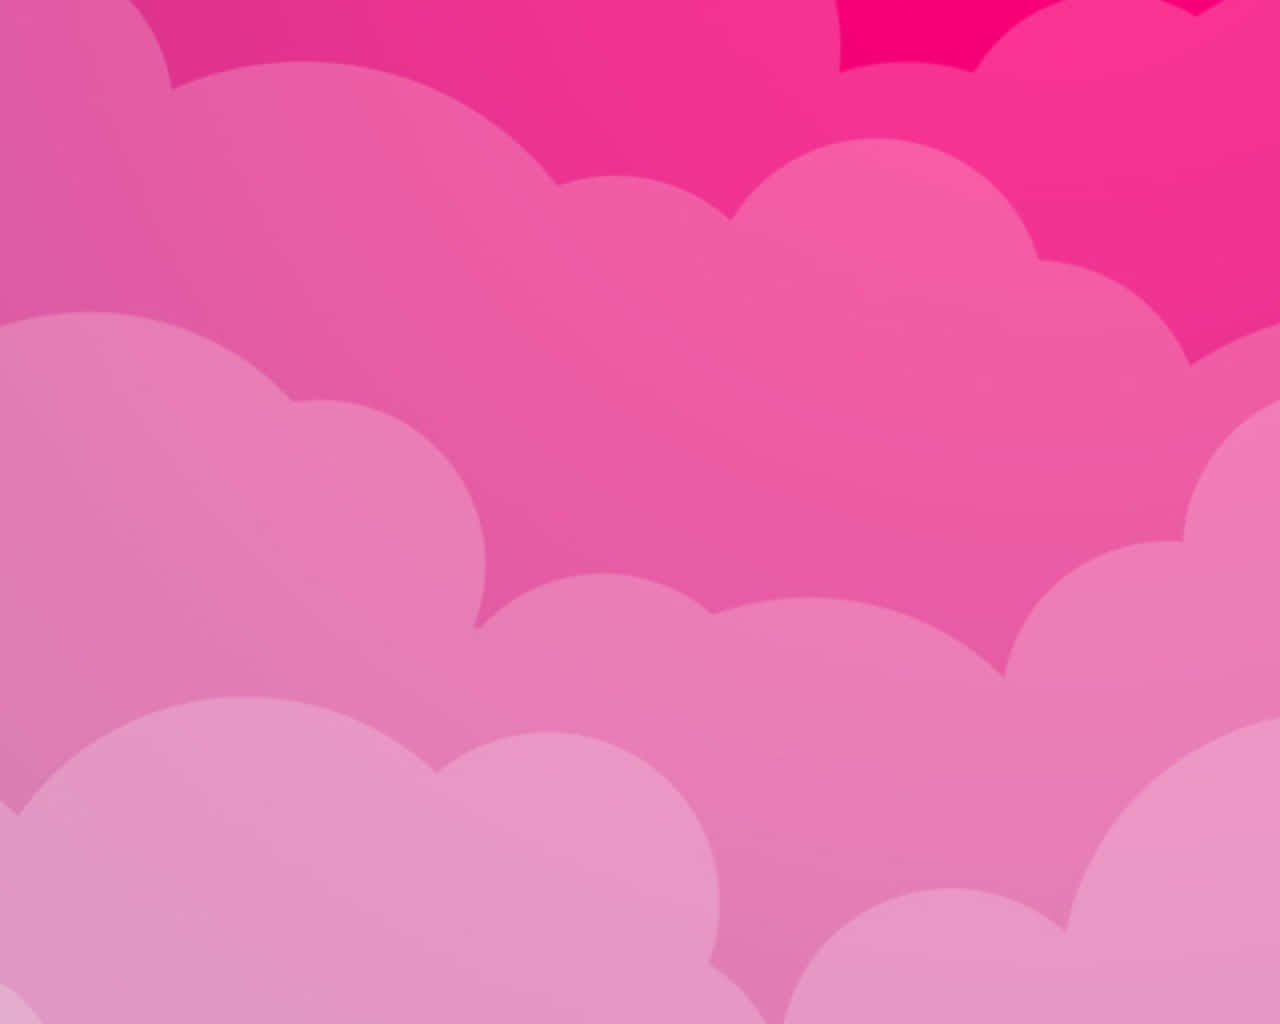 A Cute and Stylish Girly Pink Laptop Wallpaper